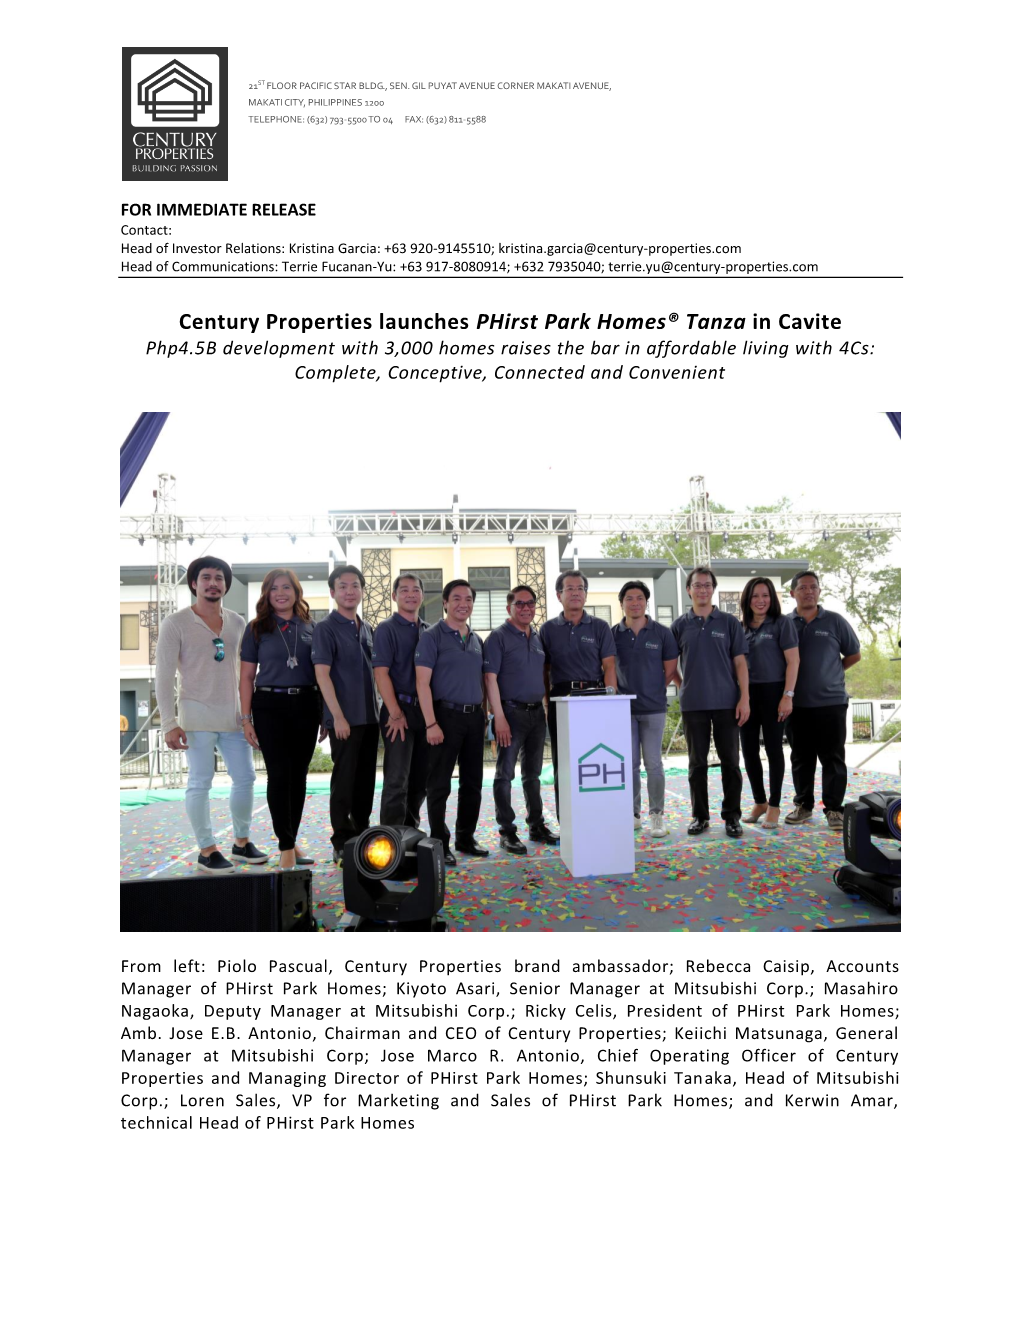 Century Properties Launches Phirst Park Homes® Tanza in Cavite